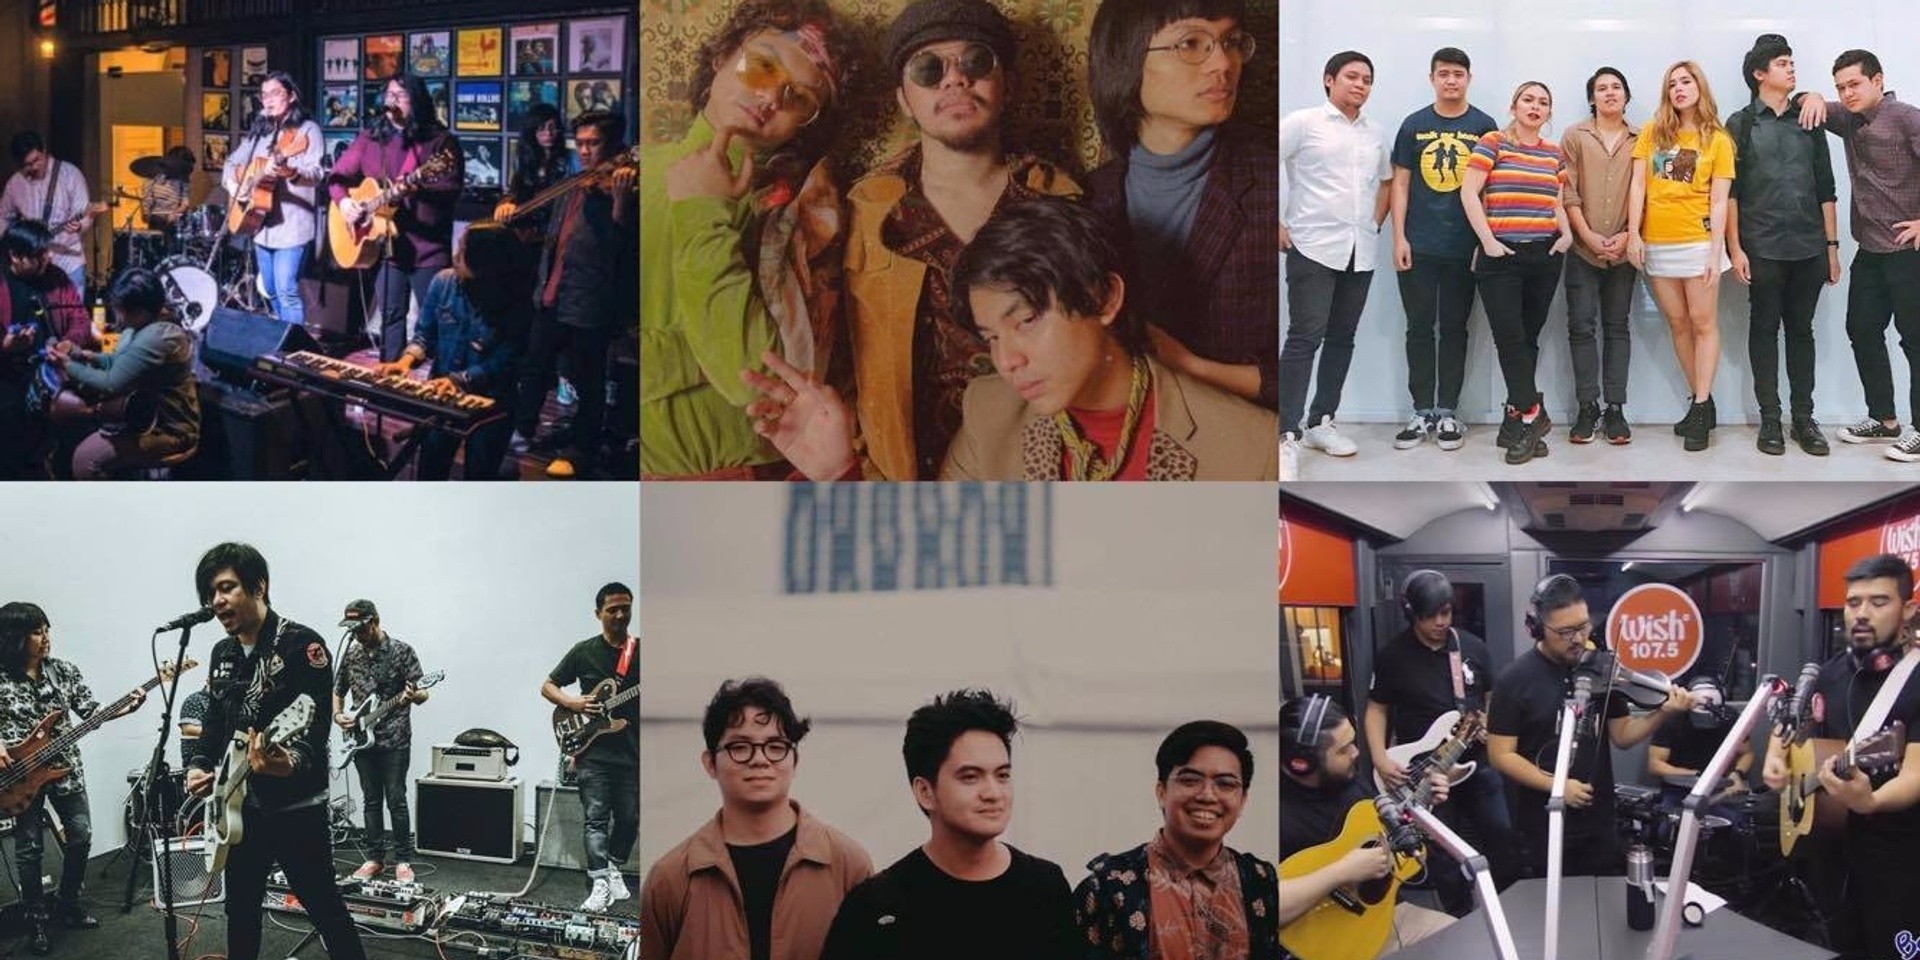 Red Ninja is throwing a massive year-end party with IV of Spades, Tom's Story, Ben&Ben, and more